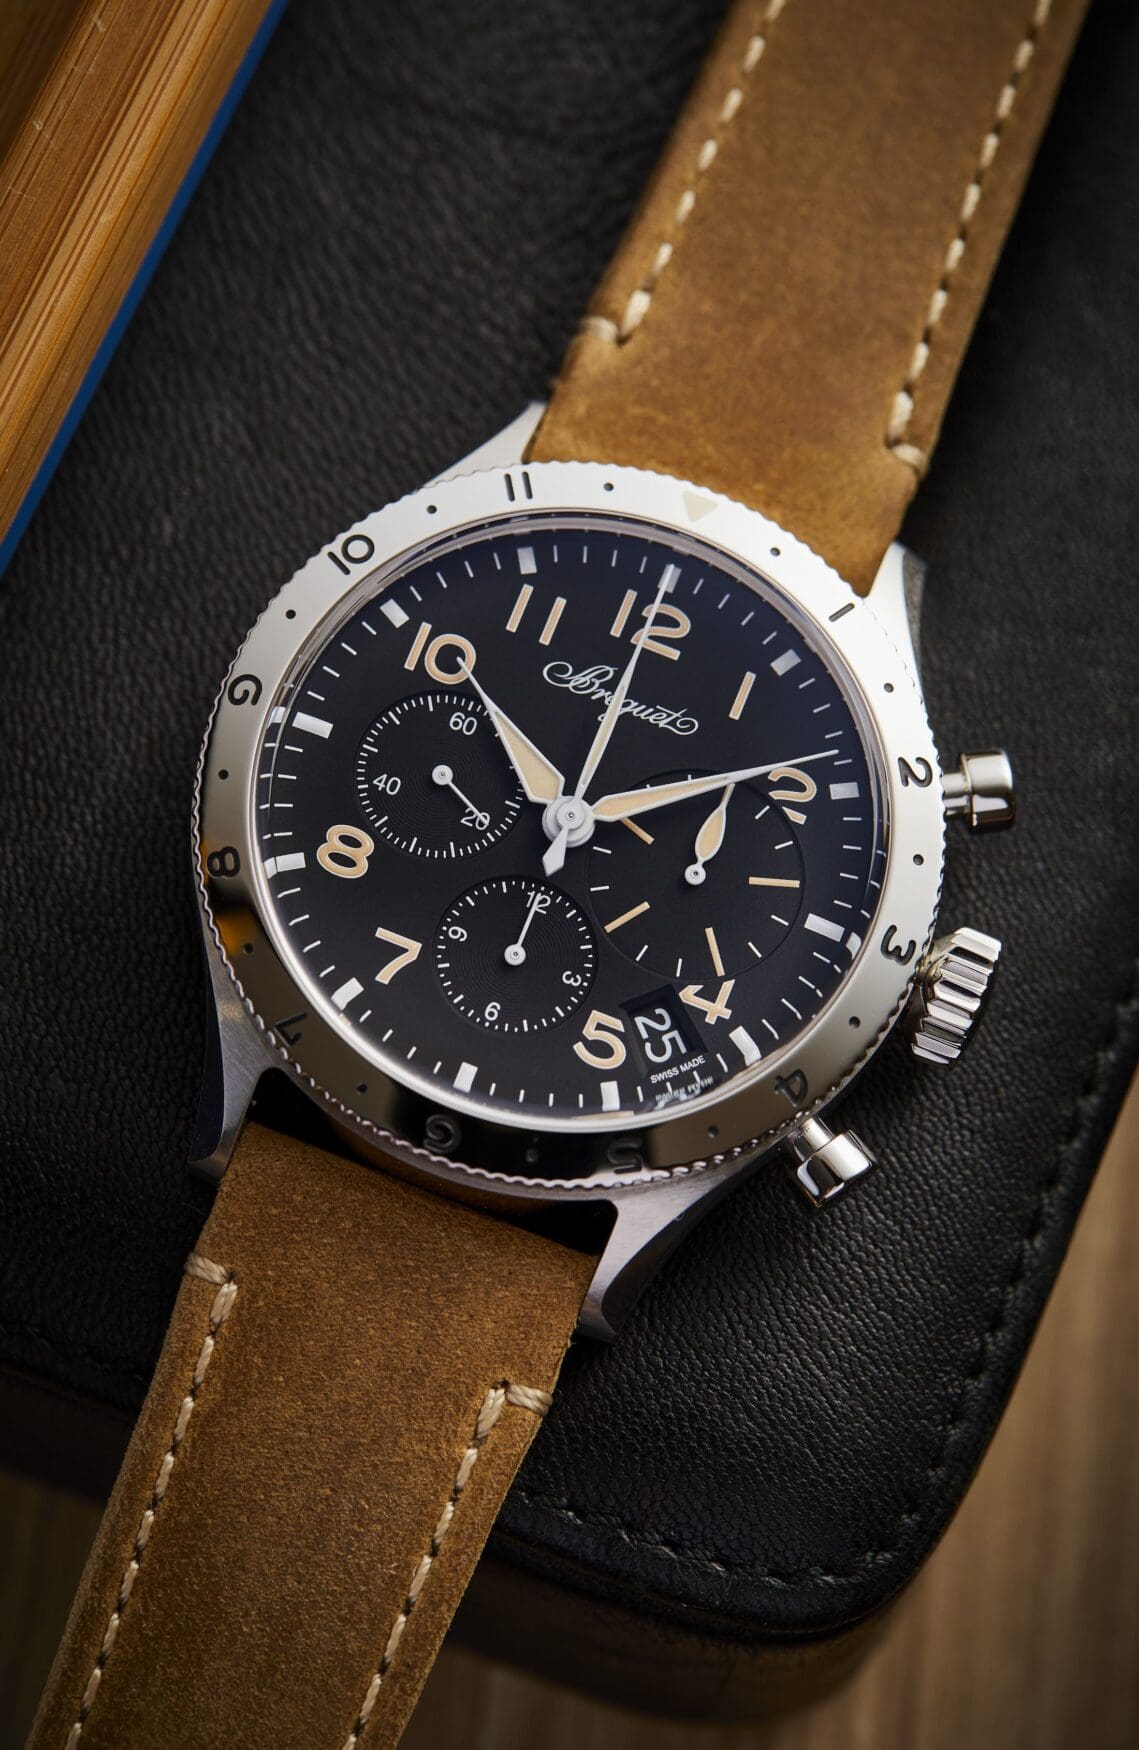 The new Breguet Type XX and Type 20 move the needle forward while being more faithful to the OGs than ever